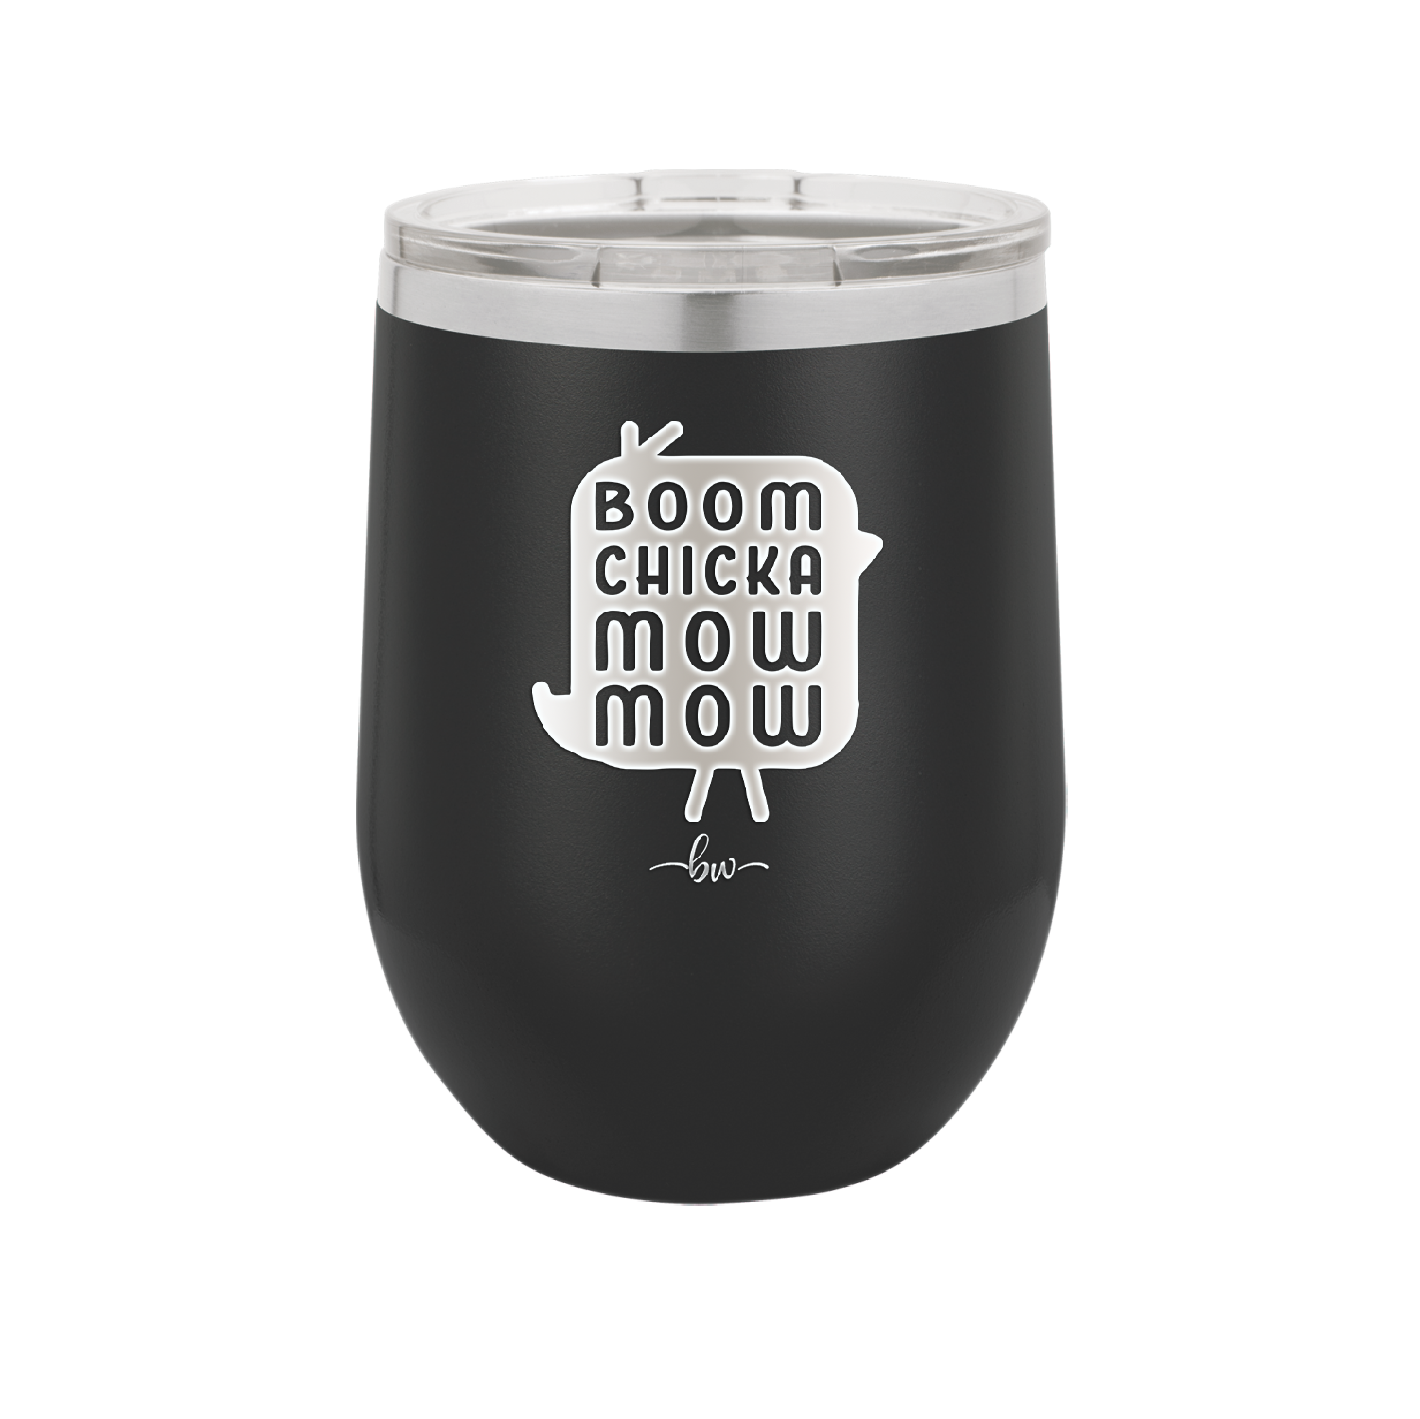 Boom Chicka Mow Mow - Laser Engraved Stainless Steel Drinkware - 2109 -